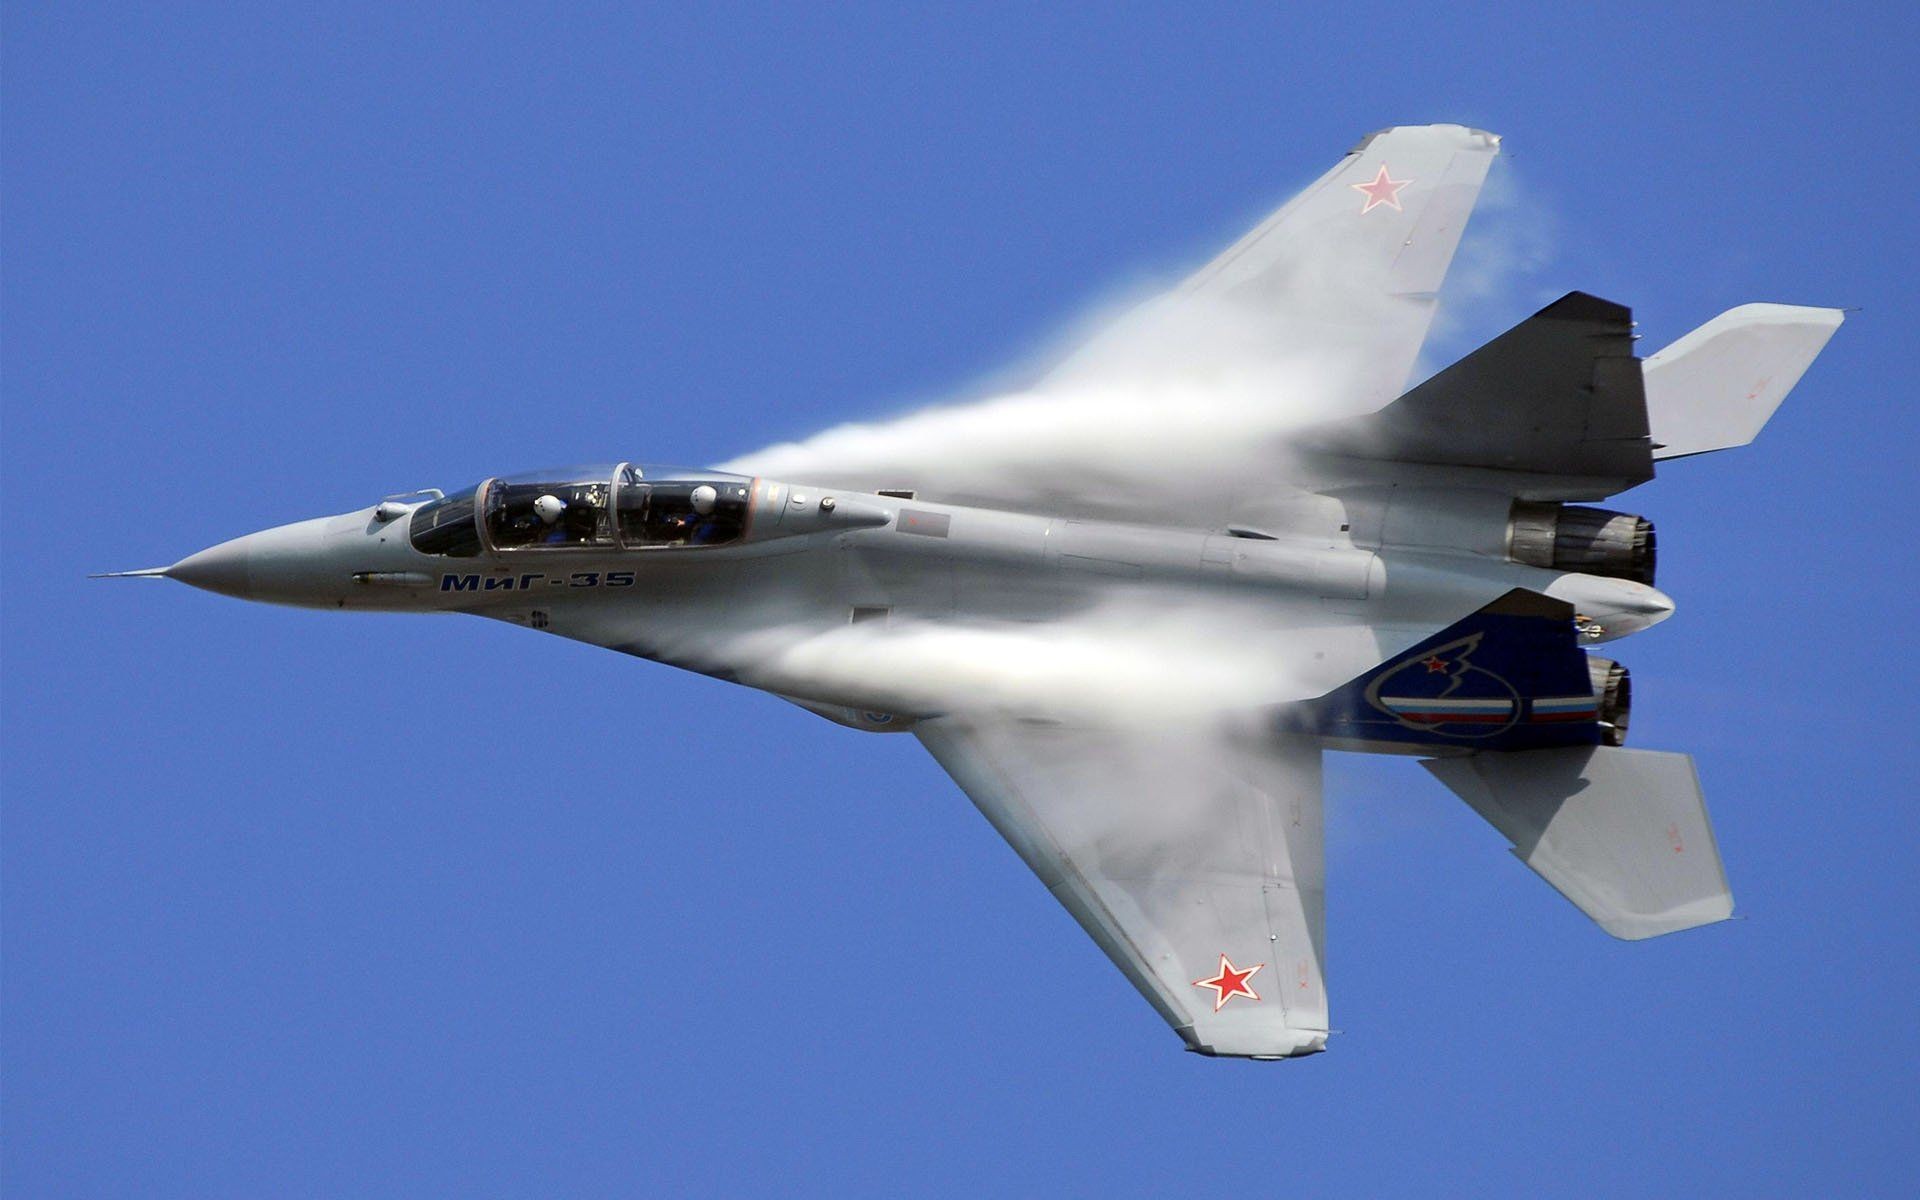 General 1920x1200 Russian Air Force Mikoyan MiG-35 military aircraft vehicle aircraft military military vehicle jet fighter condensation Russian/Soviet aircraft